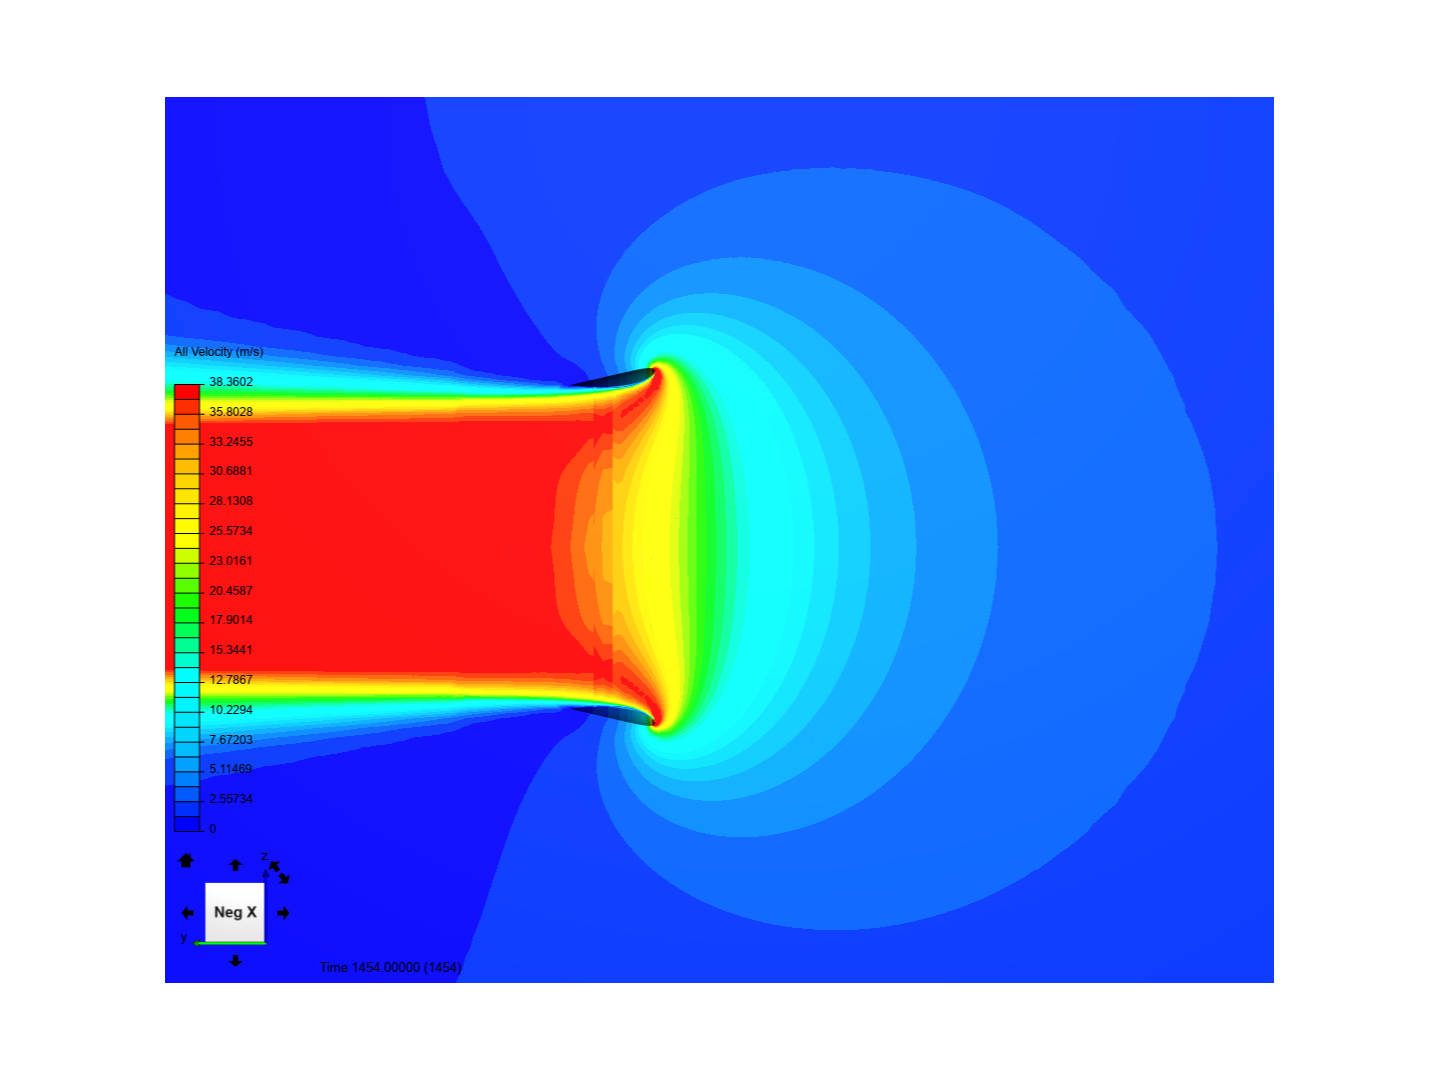 ducted fan static condition c0.45 image